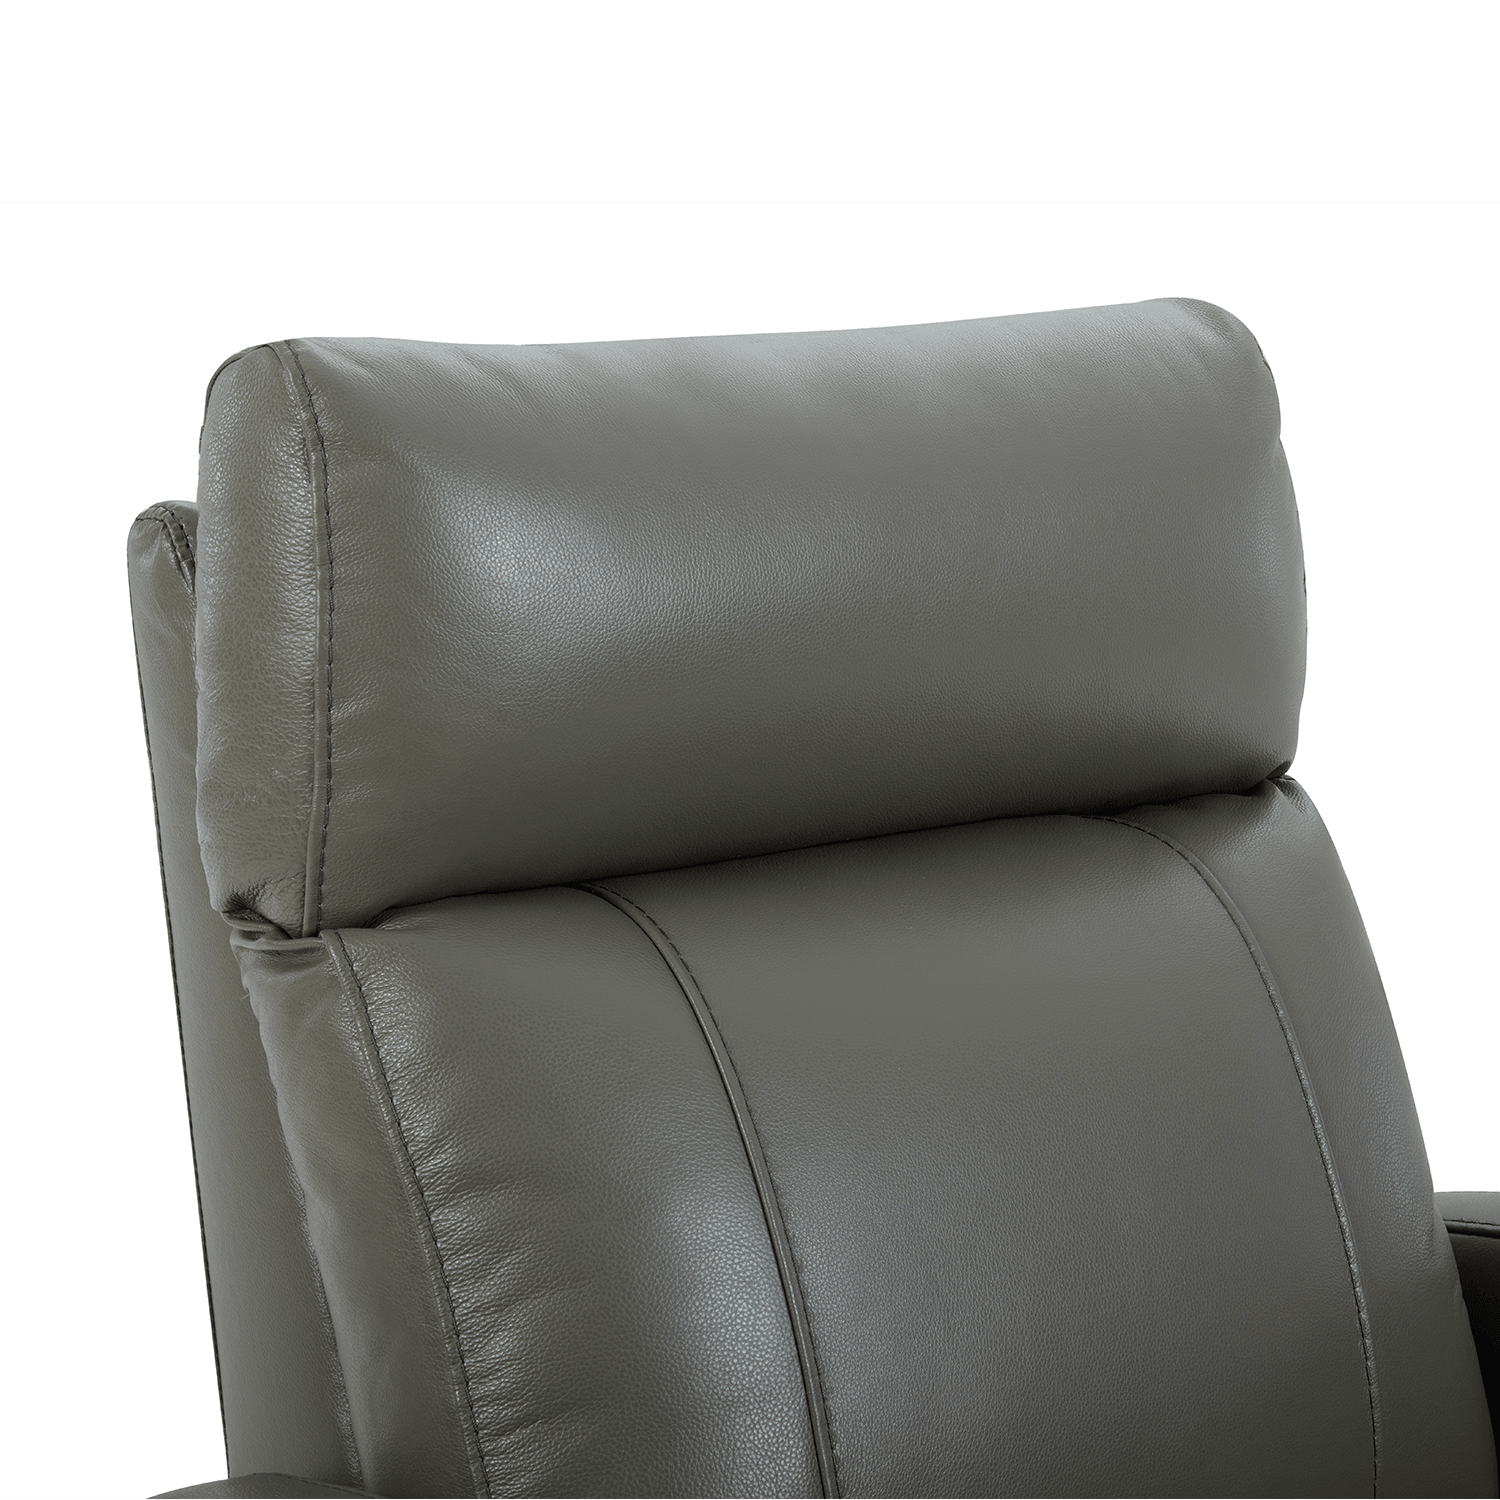 CHITA LIVING-Joy Power Swivel Recliner with Manual Headrest-Recliners-Genuine Leather-Gray-